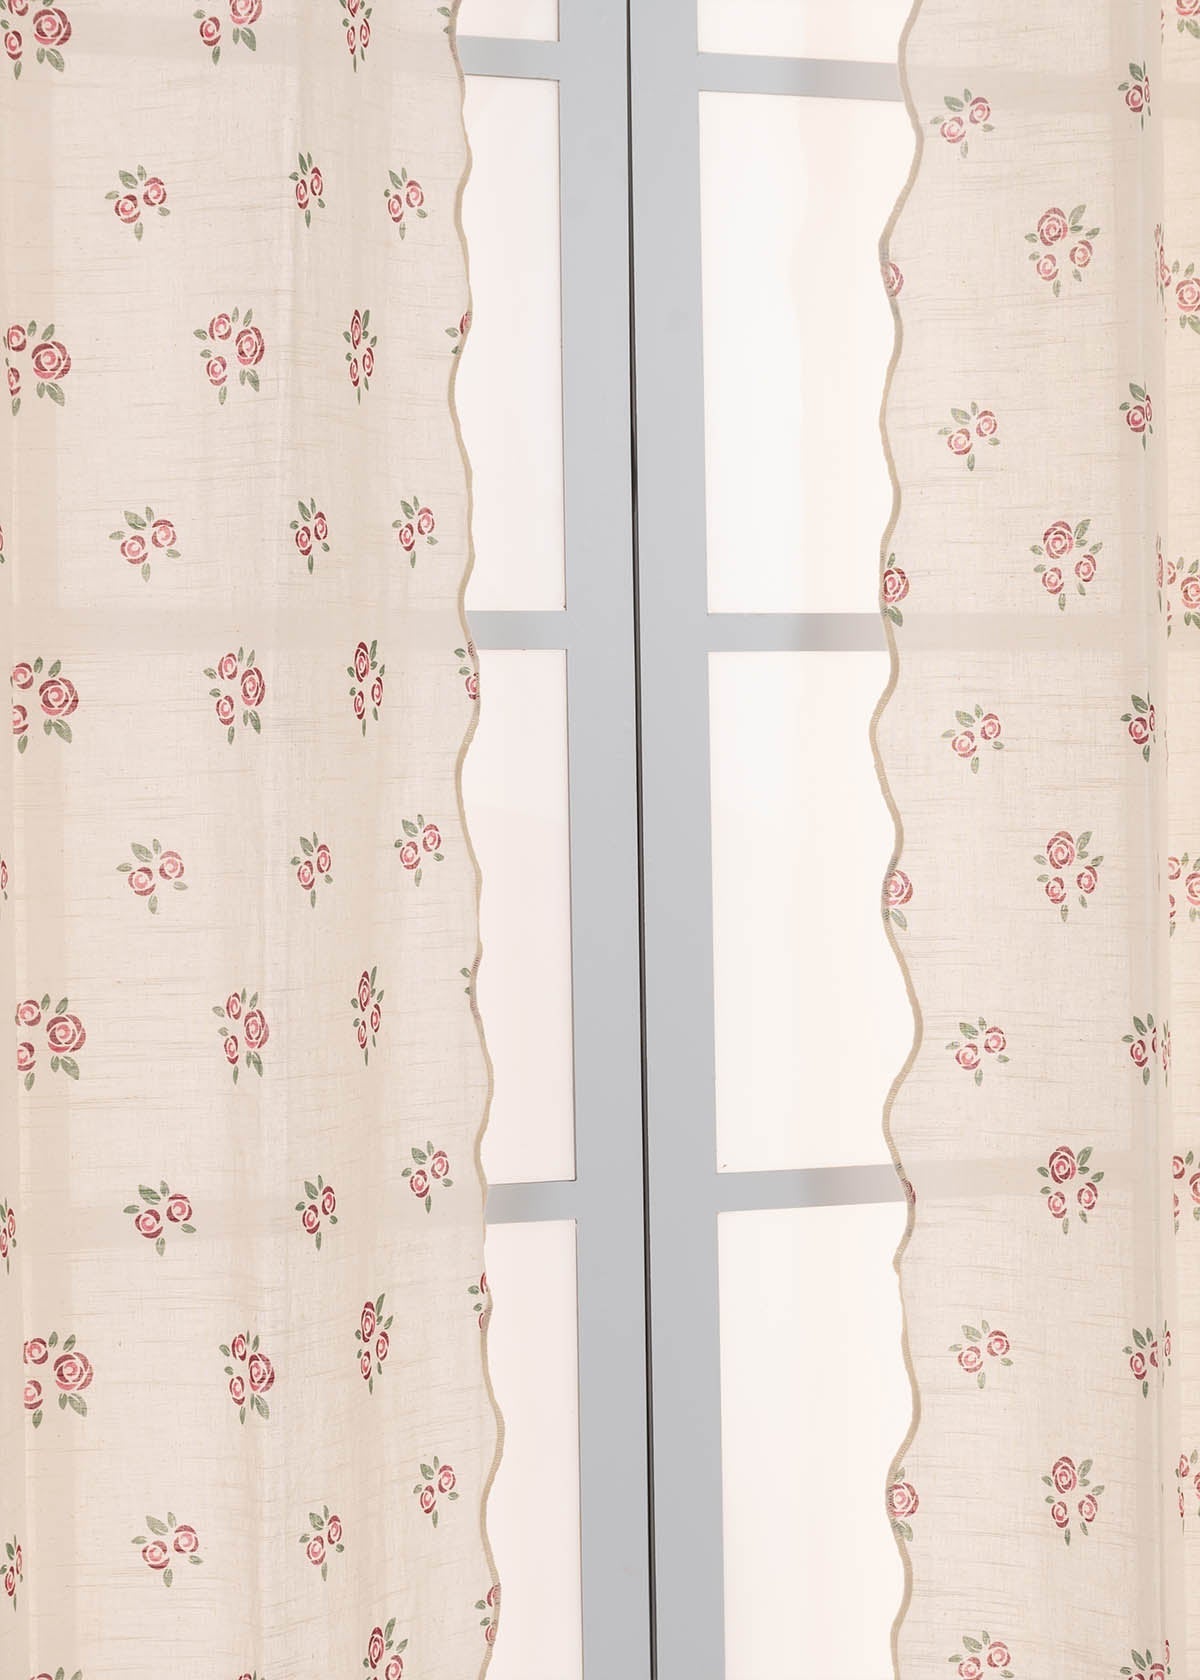 Rose Garden With Scallop Edge Printed Sheer Curtain - Wine Red - Single